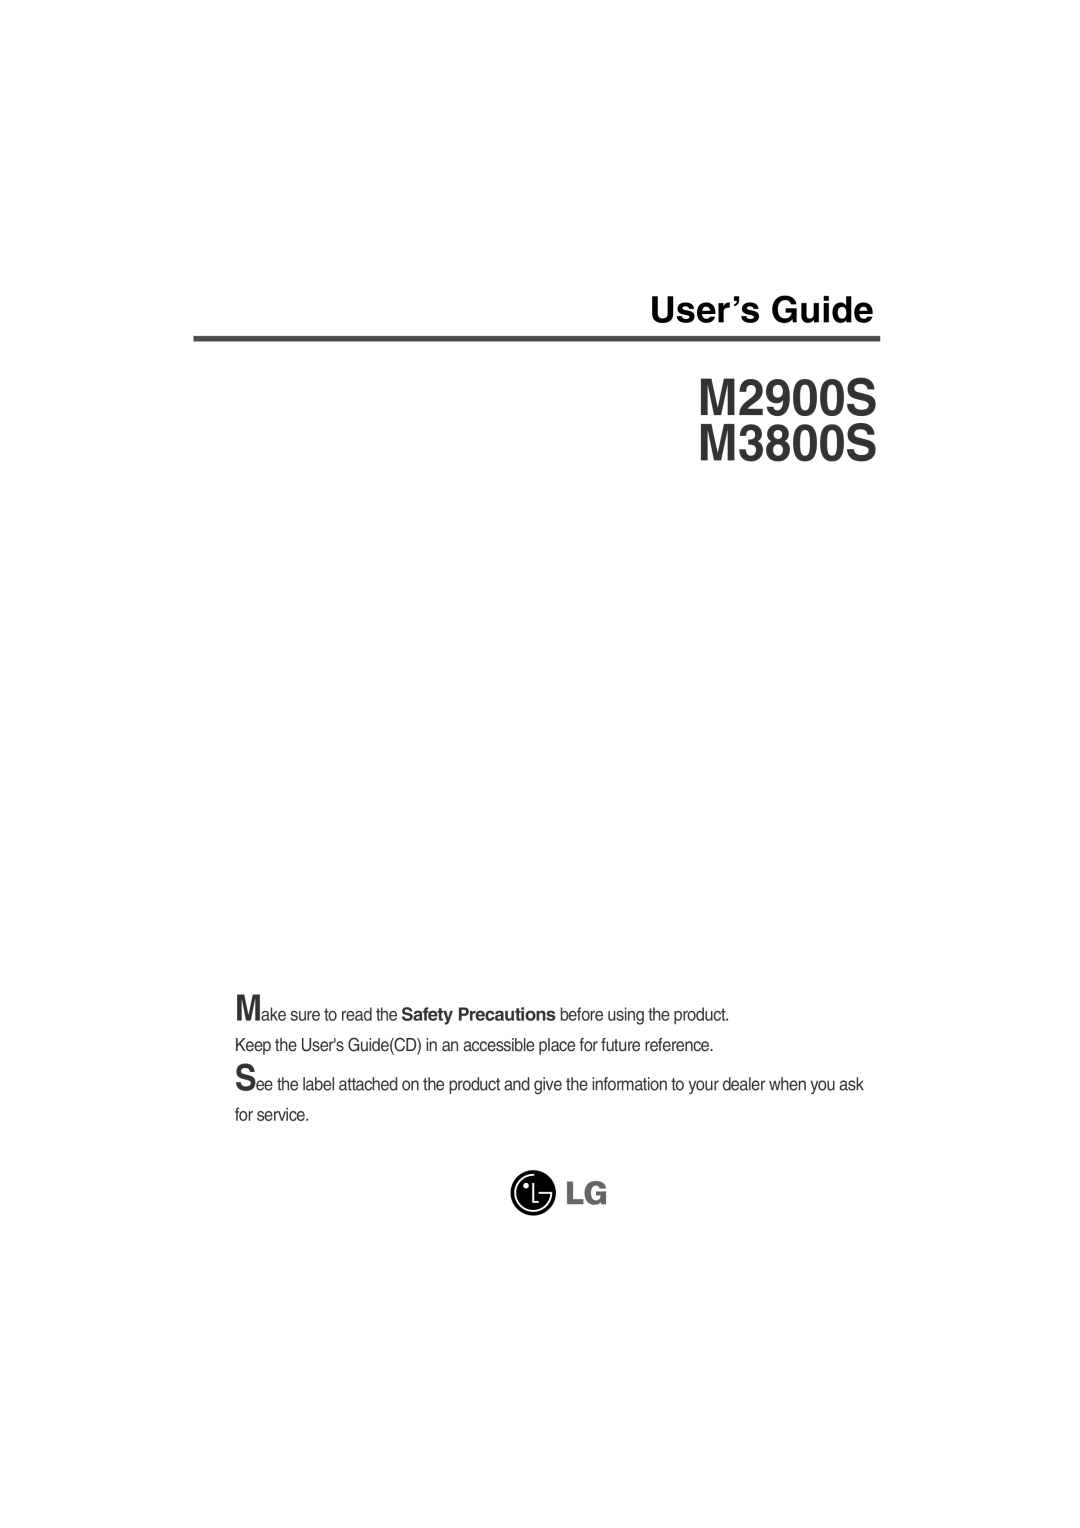 LG Electronics manual M2900S M3800S, User’s Guide 